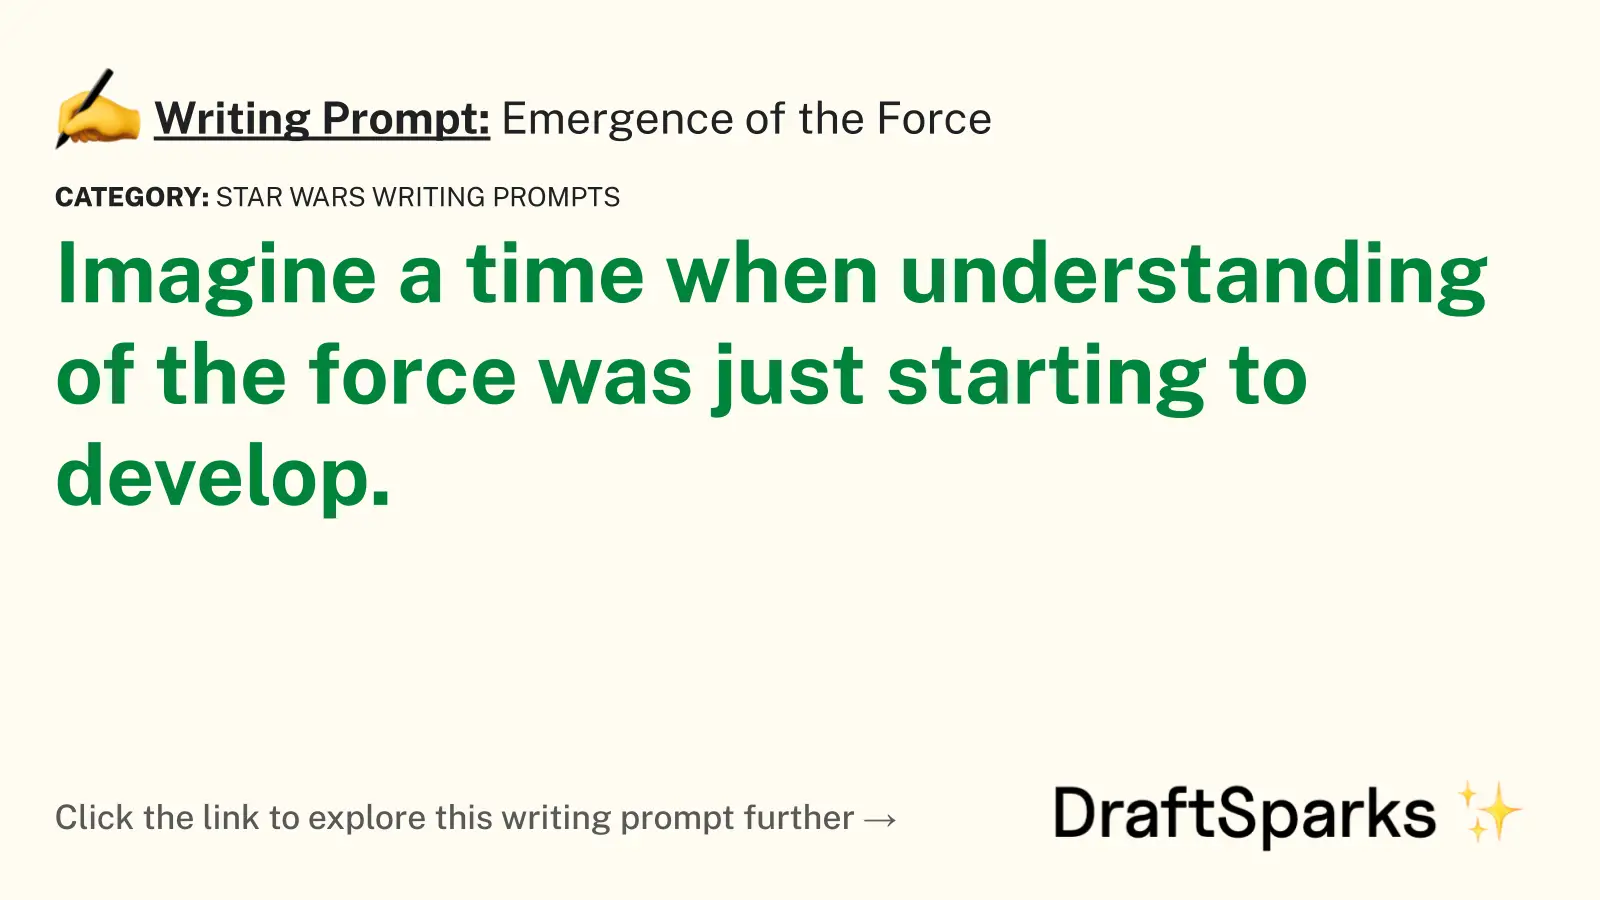 Emergence of the Force